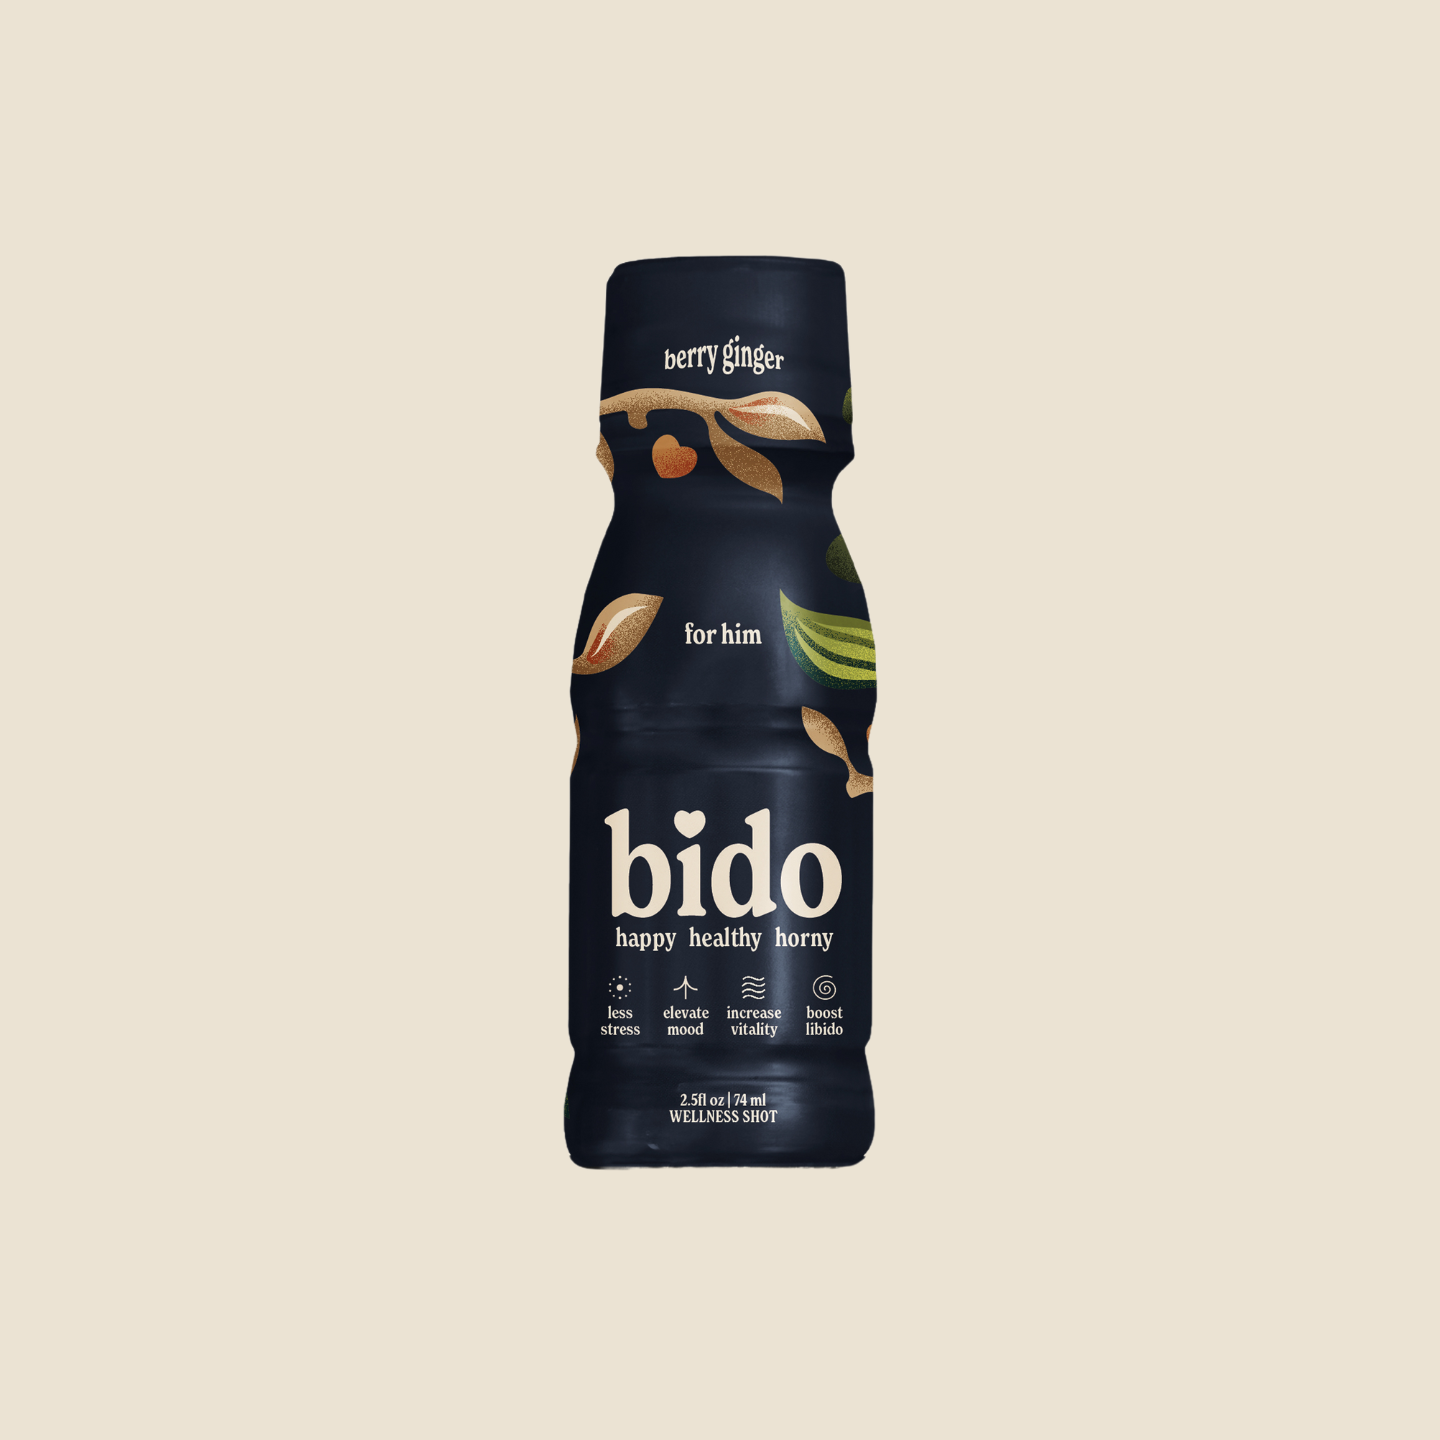 A bottle of 'bido' wellness shot with berry ginger flavor for men.